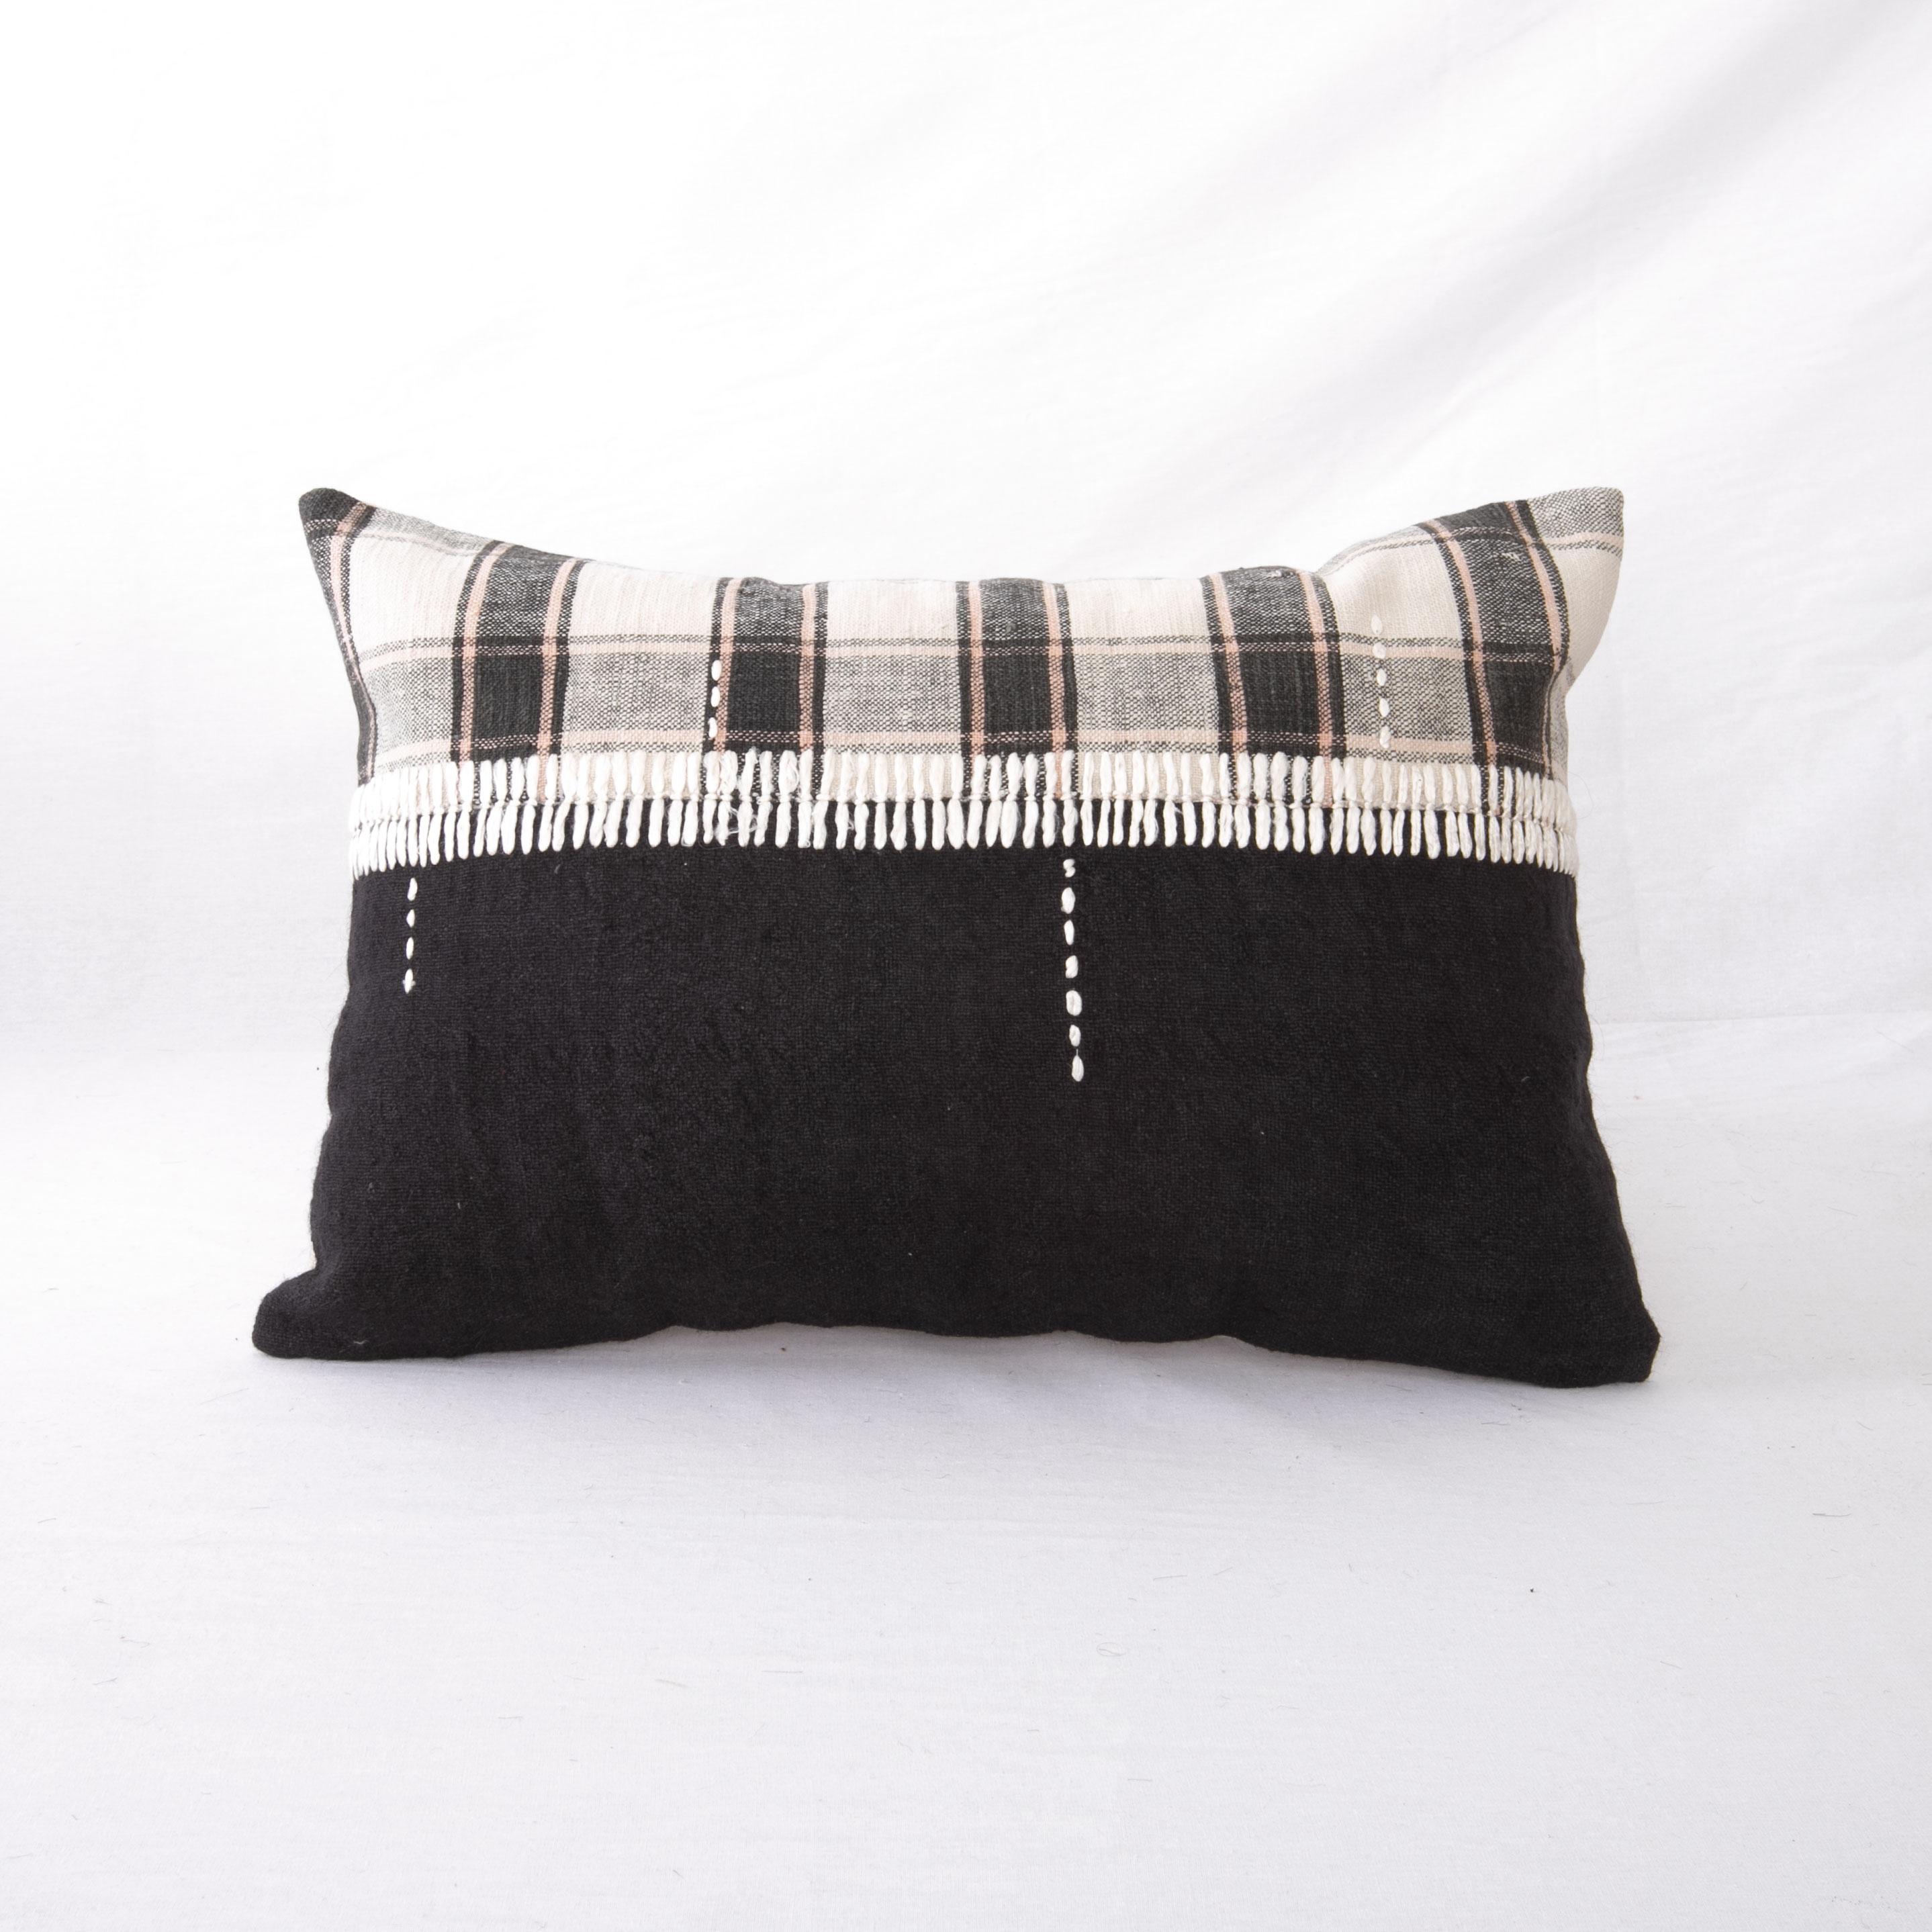 This pillow was made from  vintage hand woven textiles. Our addition to the piece is silk hand stitching as a detail. 
It does not come with an insert. 
Linen in the back. 
Zipper closure.
   
